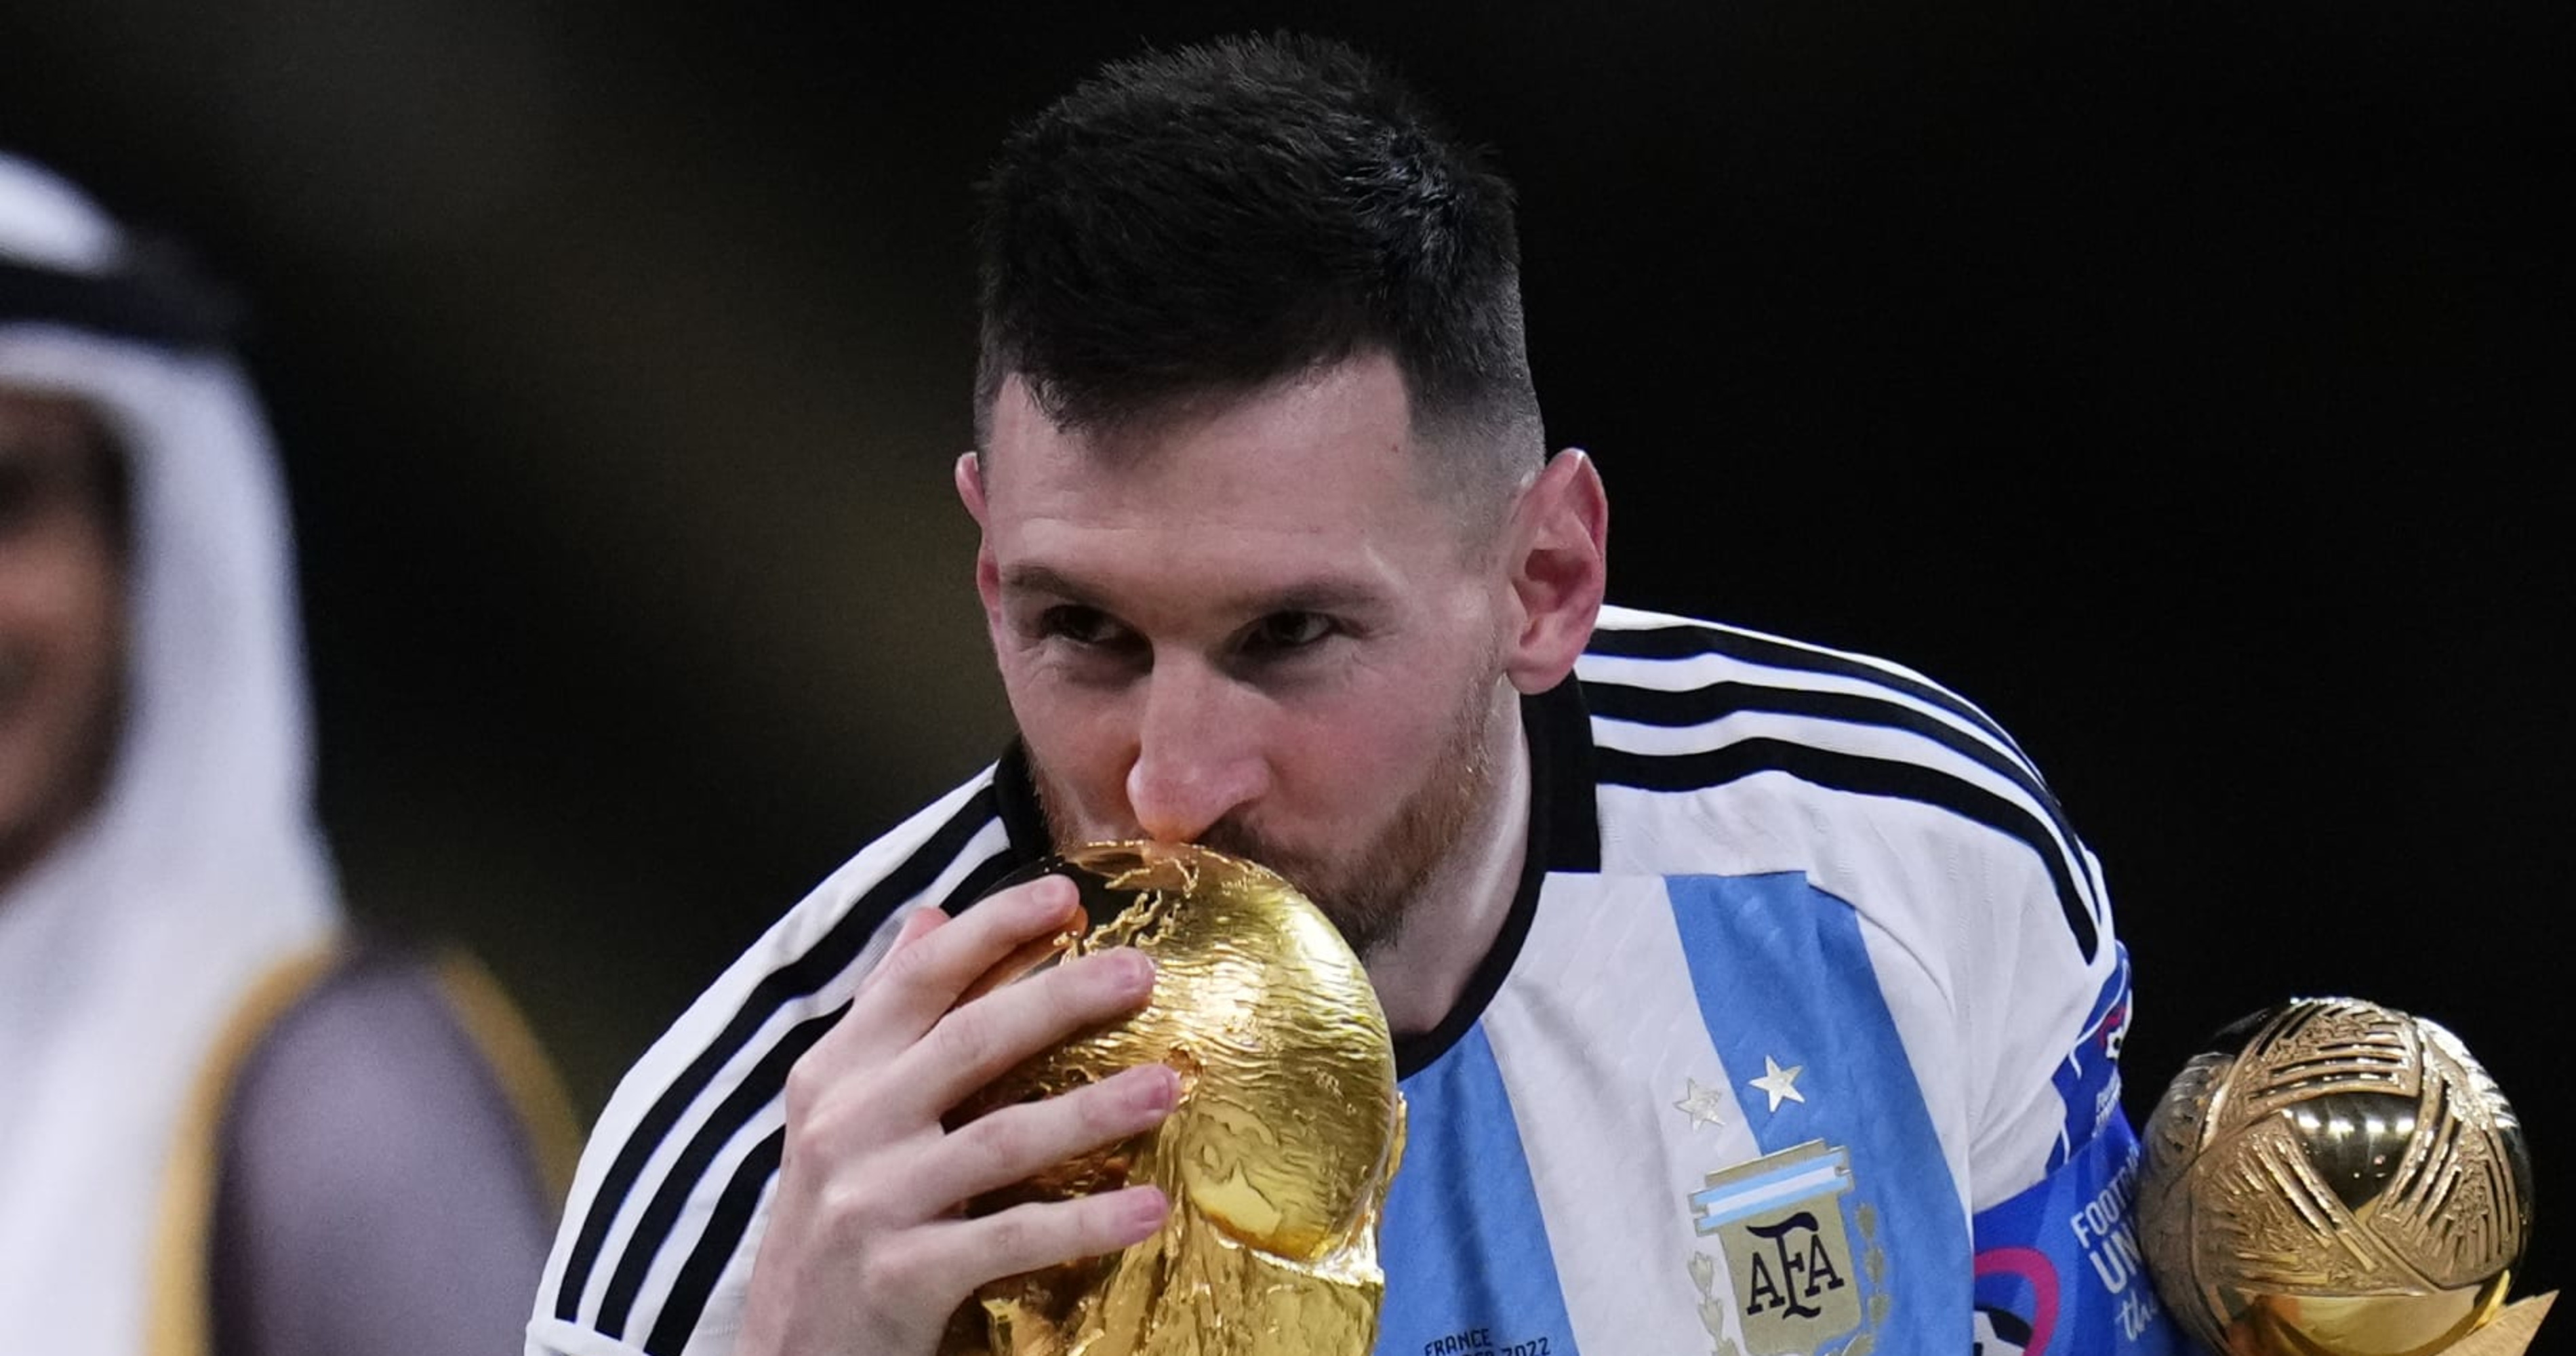 OUR TOP 5 ARGENTINA WORLD CUP SHIRTS - SoccerBible